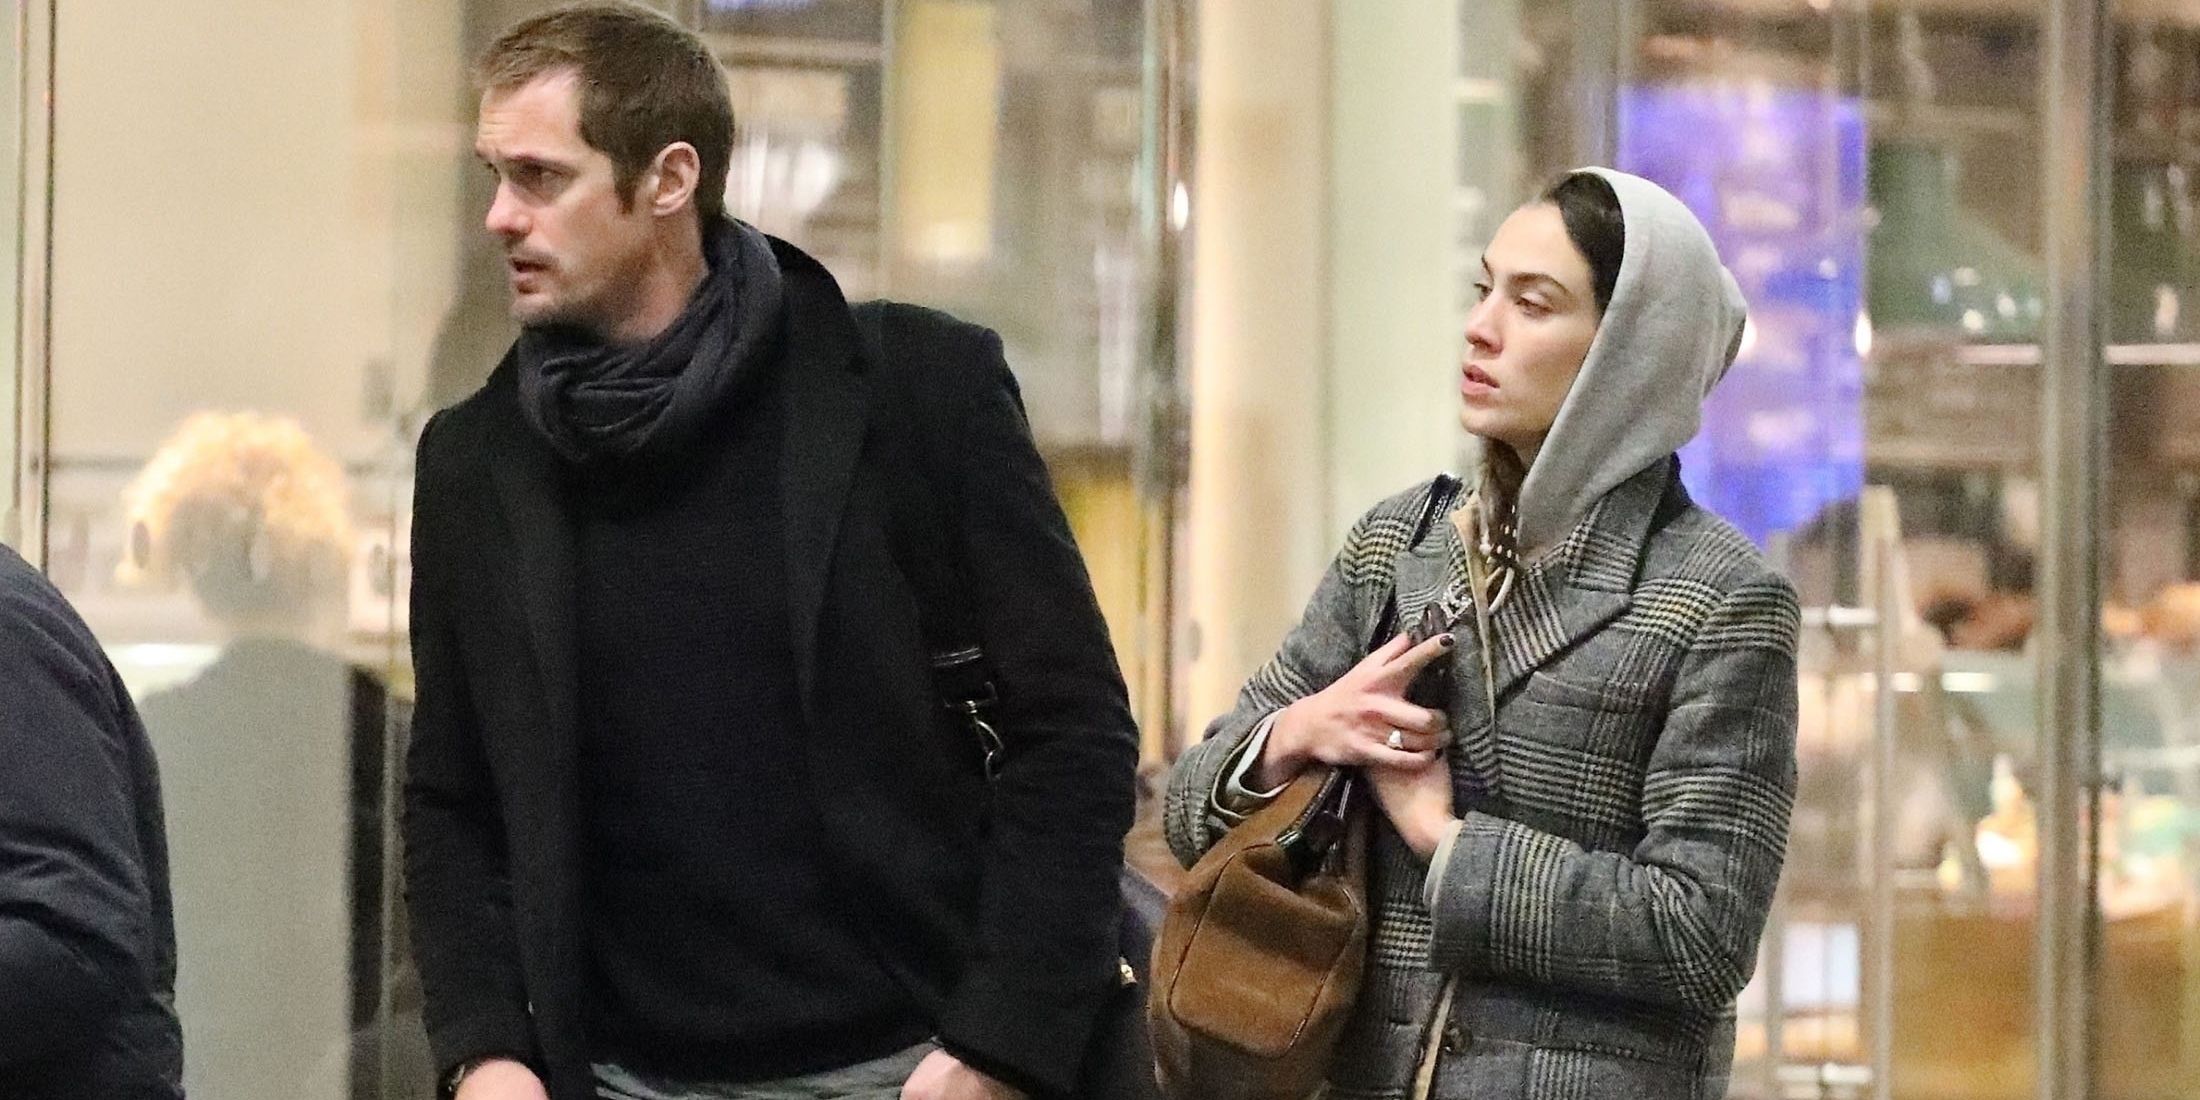 Alexa Chung And Alexander Skarsgard Are Seemingly Back On, To These New Pictures